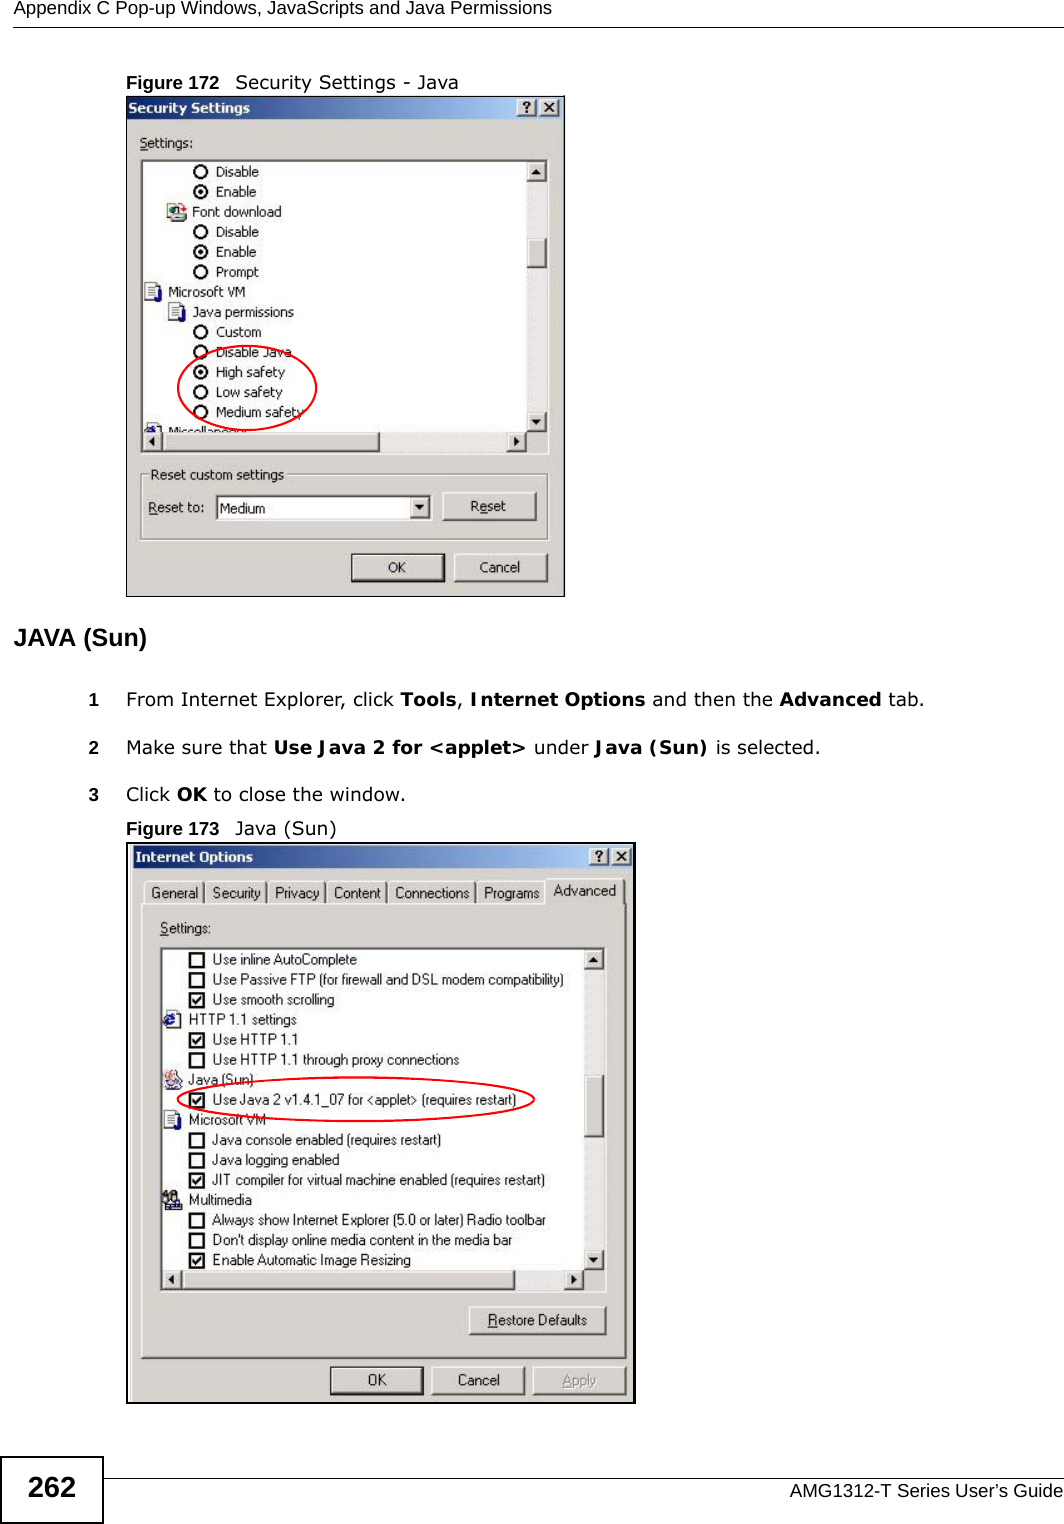 Appendix C Pop-up Windows, JavaScripts and Java PermissionsAMG1312-T Series User’s Guide262Figure 172   Security Settings - Java JAVA (Sun)1From Internet Explorer, click Tools, Internet Options and then the Advanced tab. 2Make sure that Use Java 2 for &lt;applet&gt; under Java (Sun) is selected.3Click OK to close the window.Figure 173   Java (Sun)